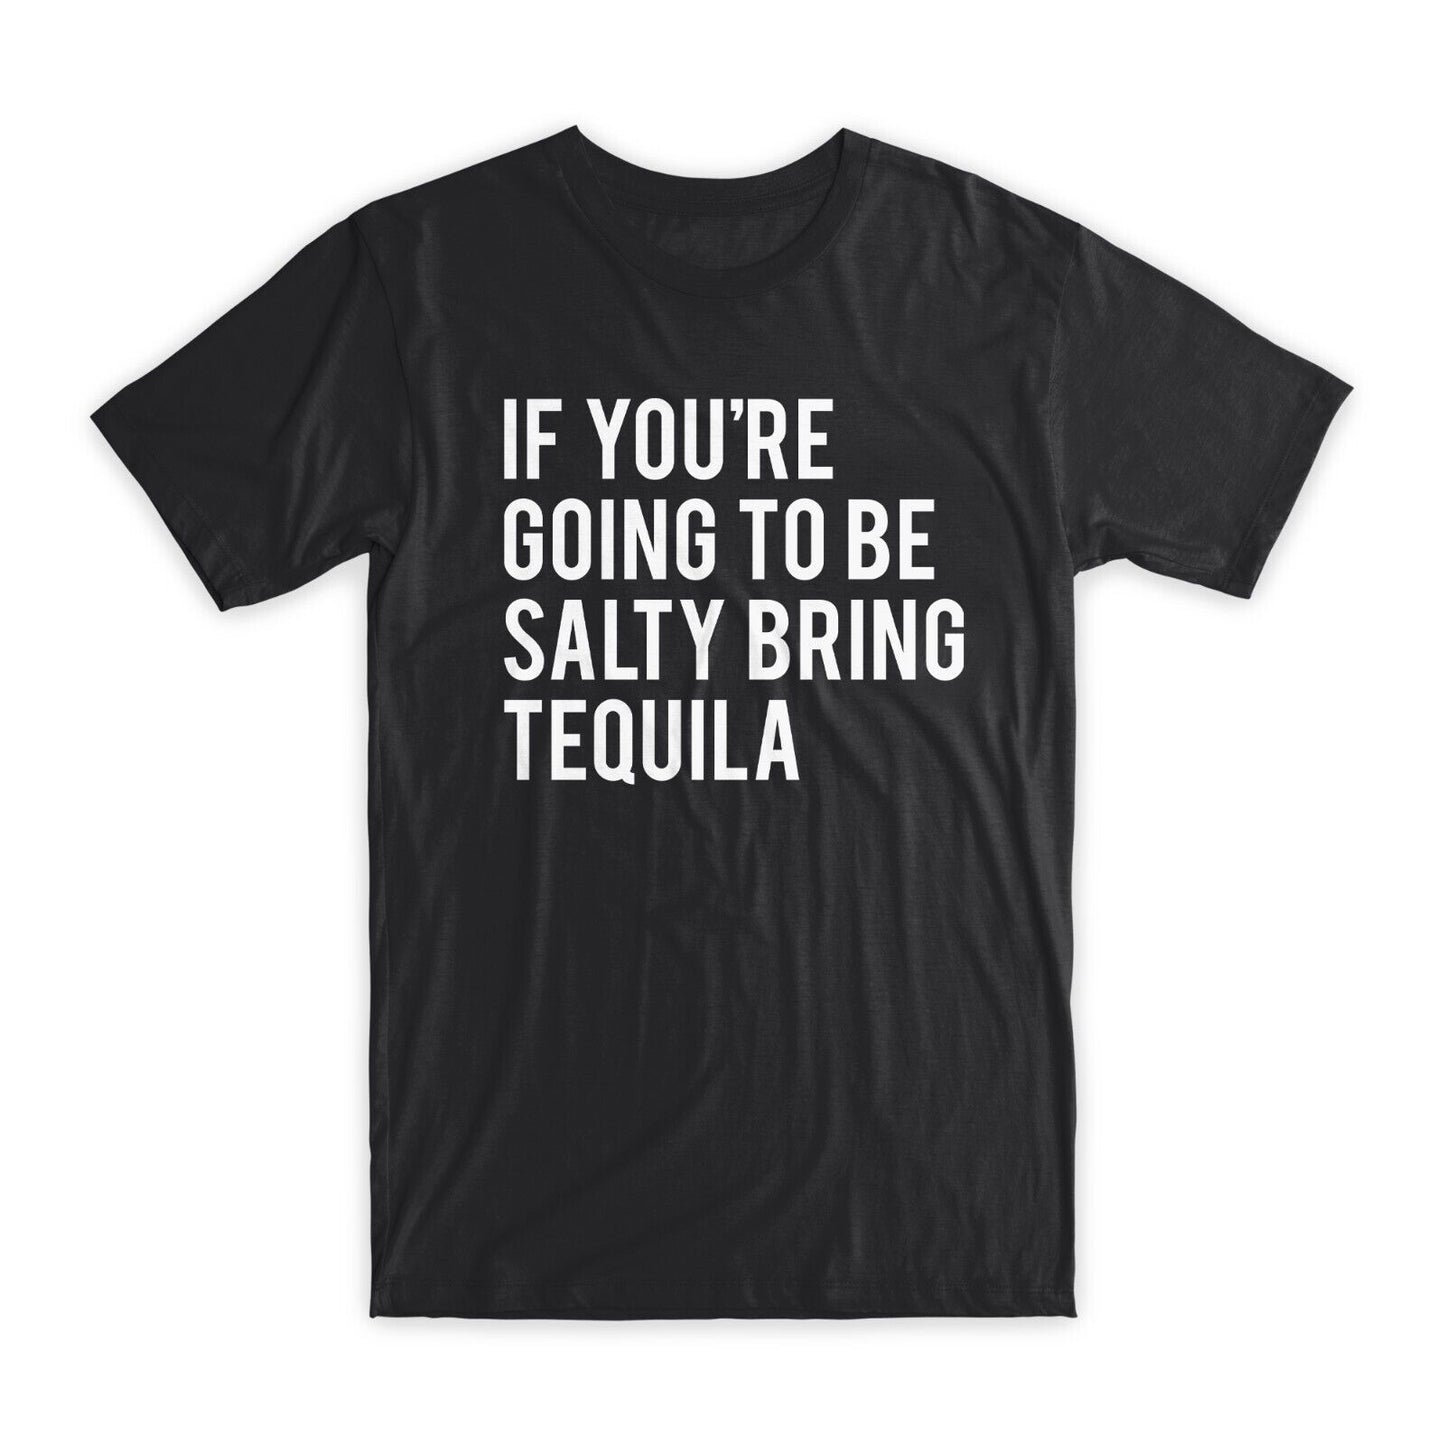 If You're Going To Be Salty Bring Tequila T-Shirt Premium Cotton Funny Tees NEW